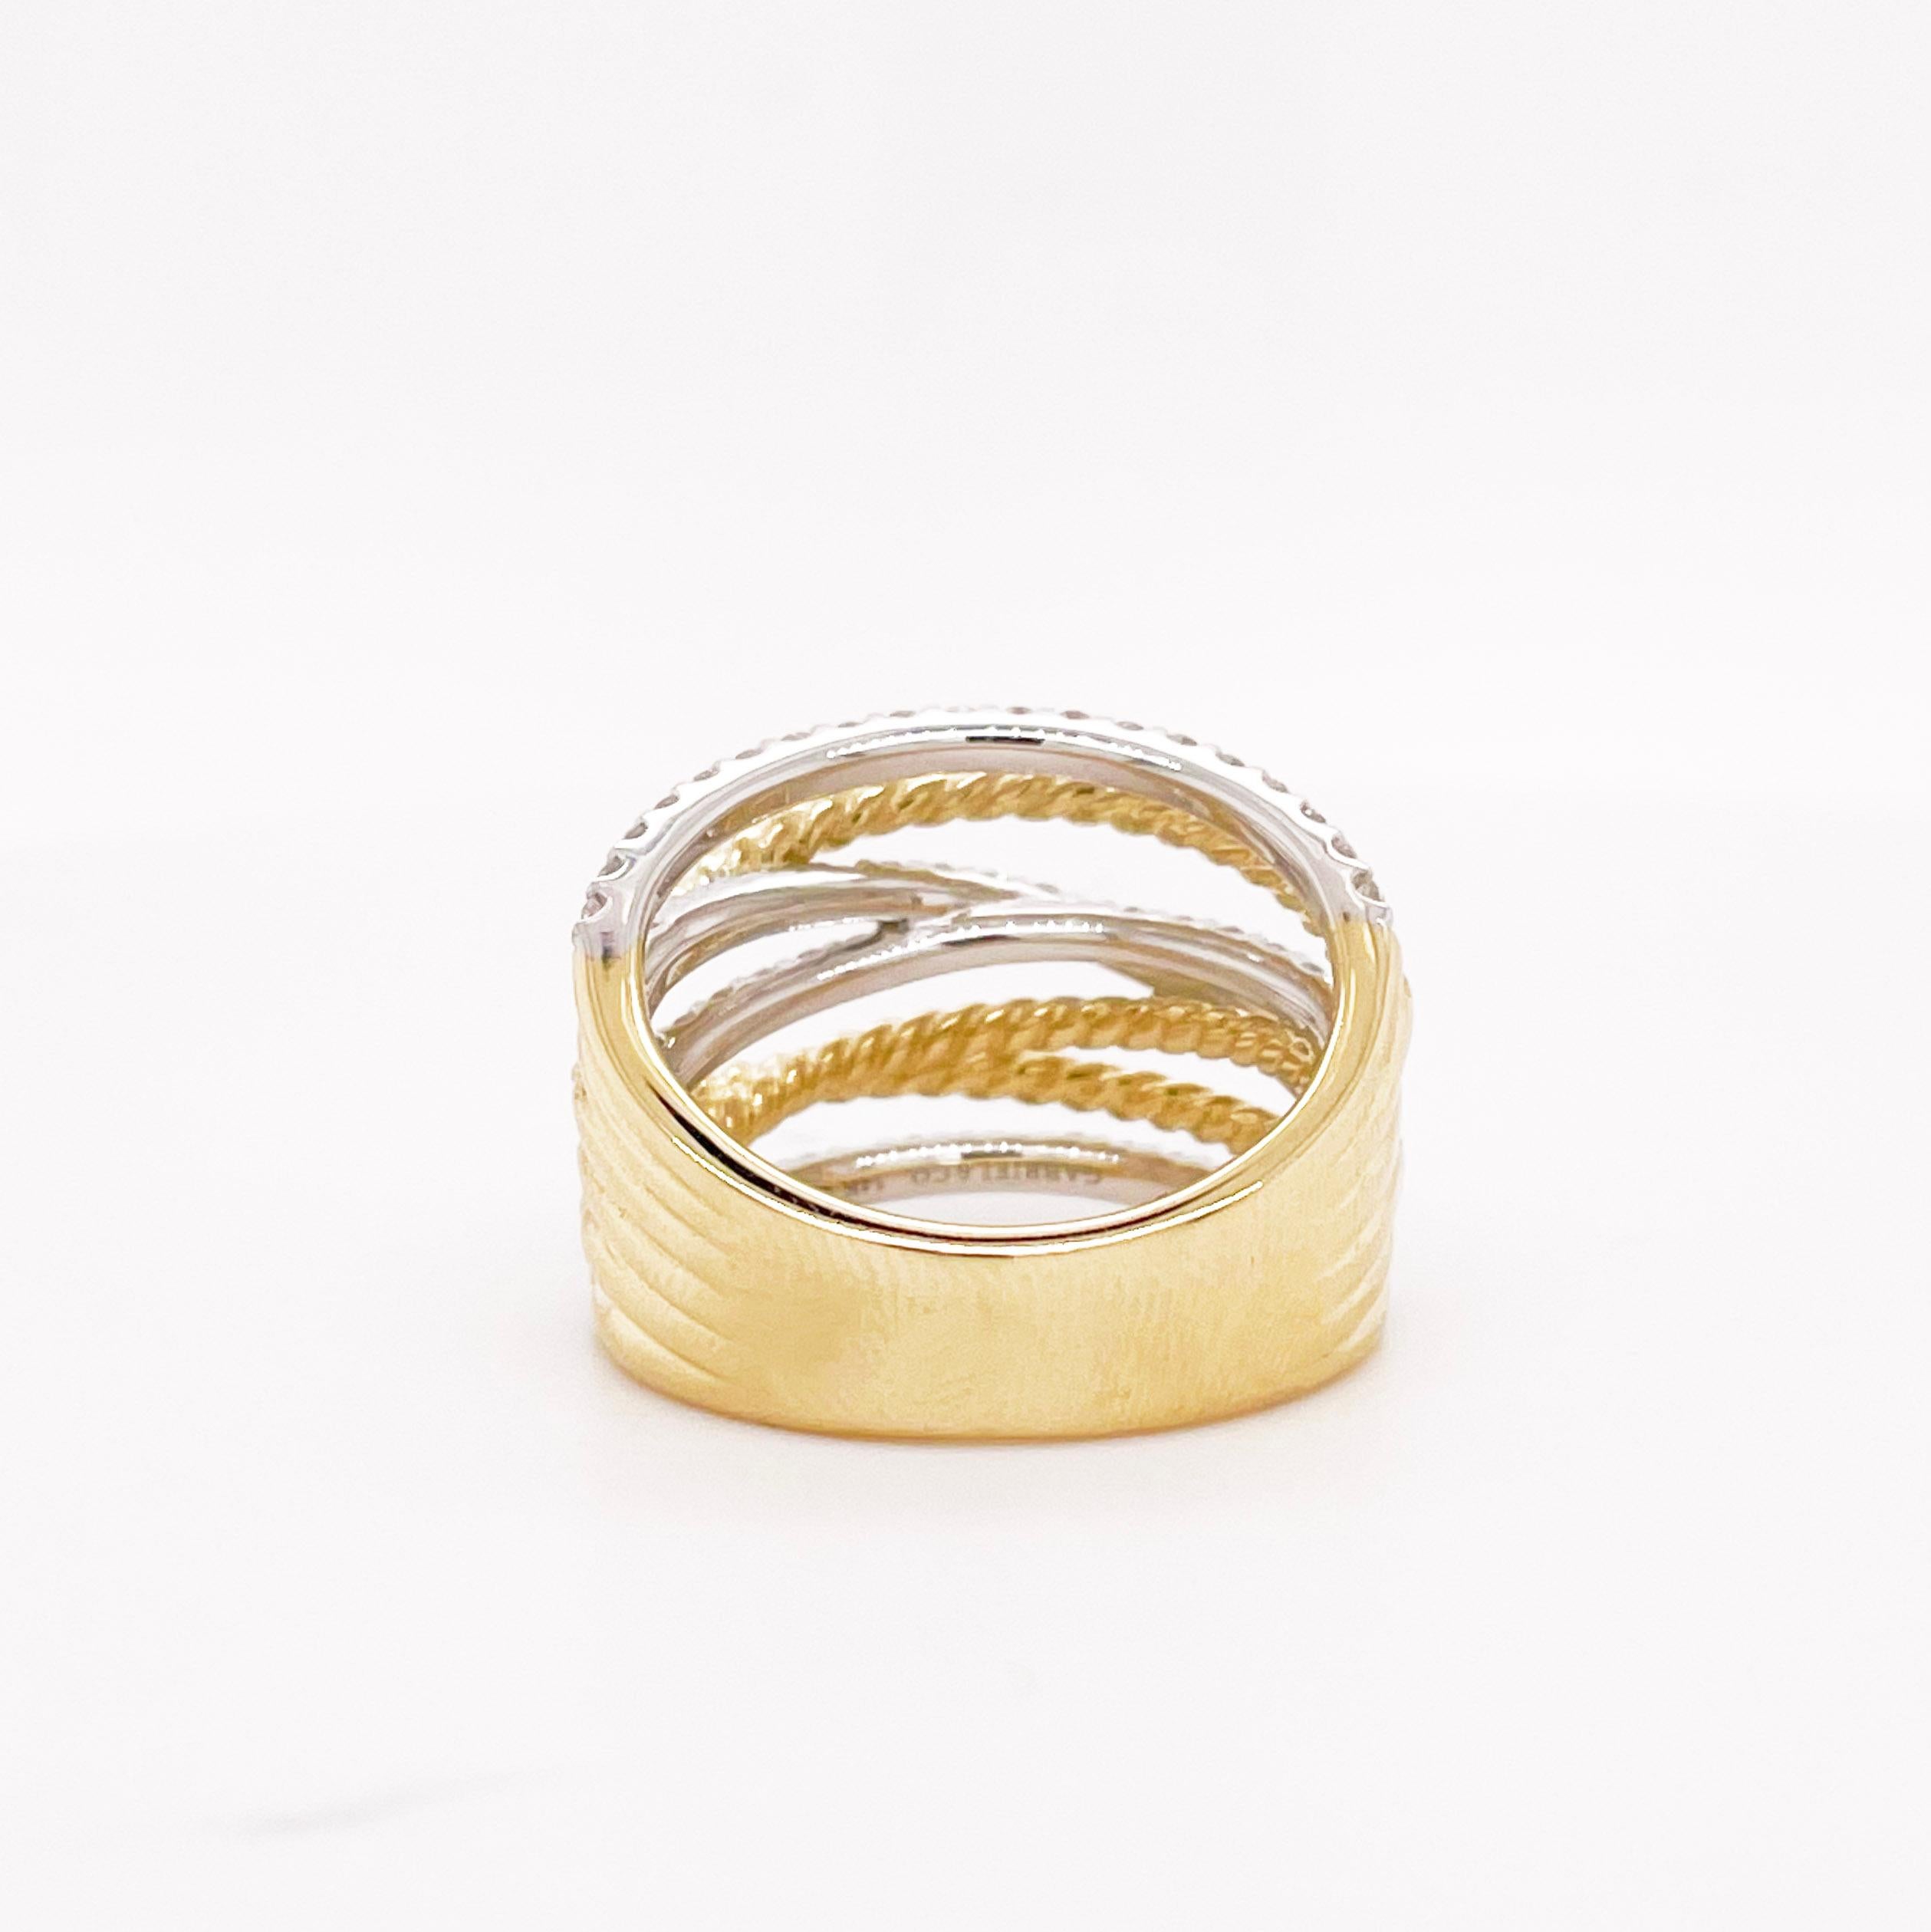 For Sale:  Twisted Rope Ring w Diamond Multi Row Band in 14K Mixed Metal 76 Diamonds 3